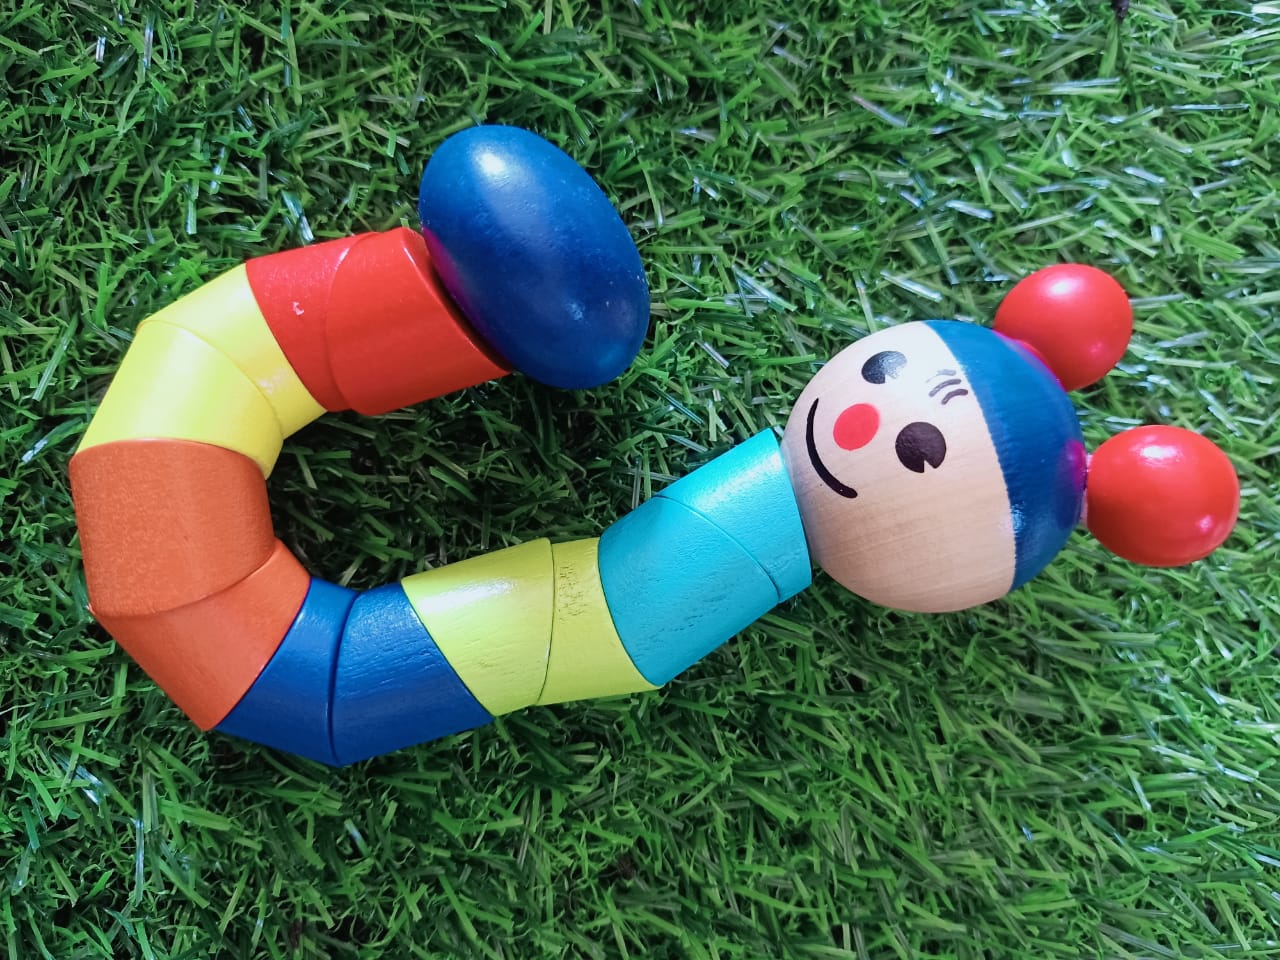 Twist-Colored Wooden Toy for Kids - SHTM1018